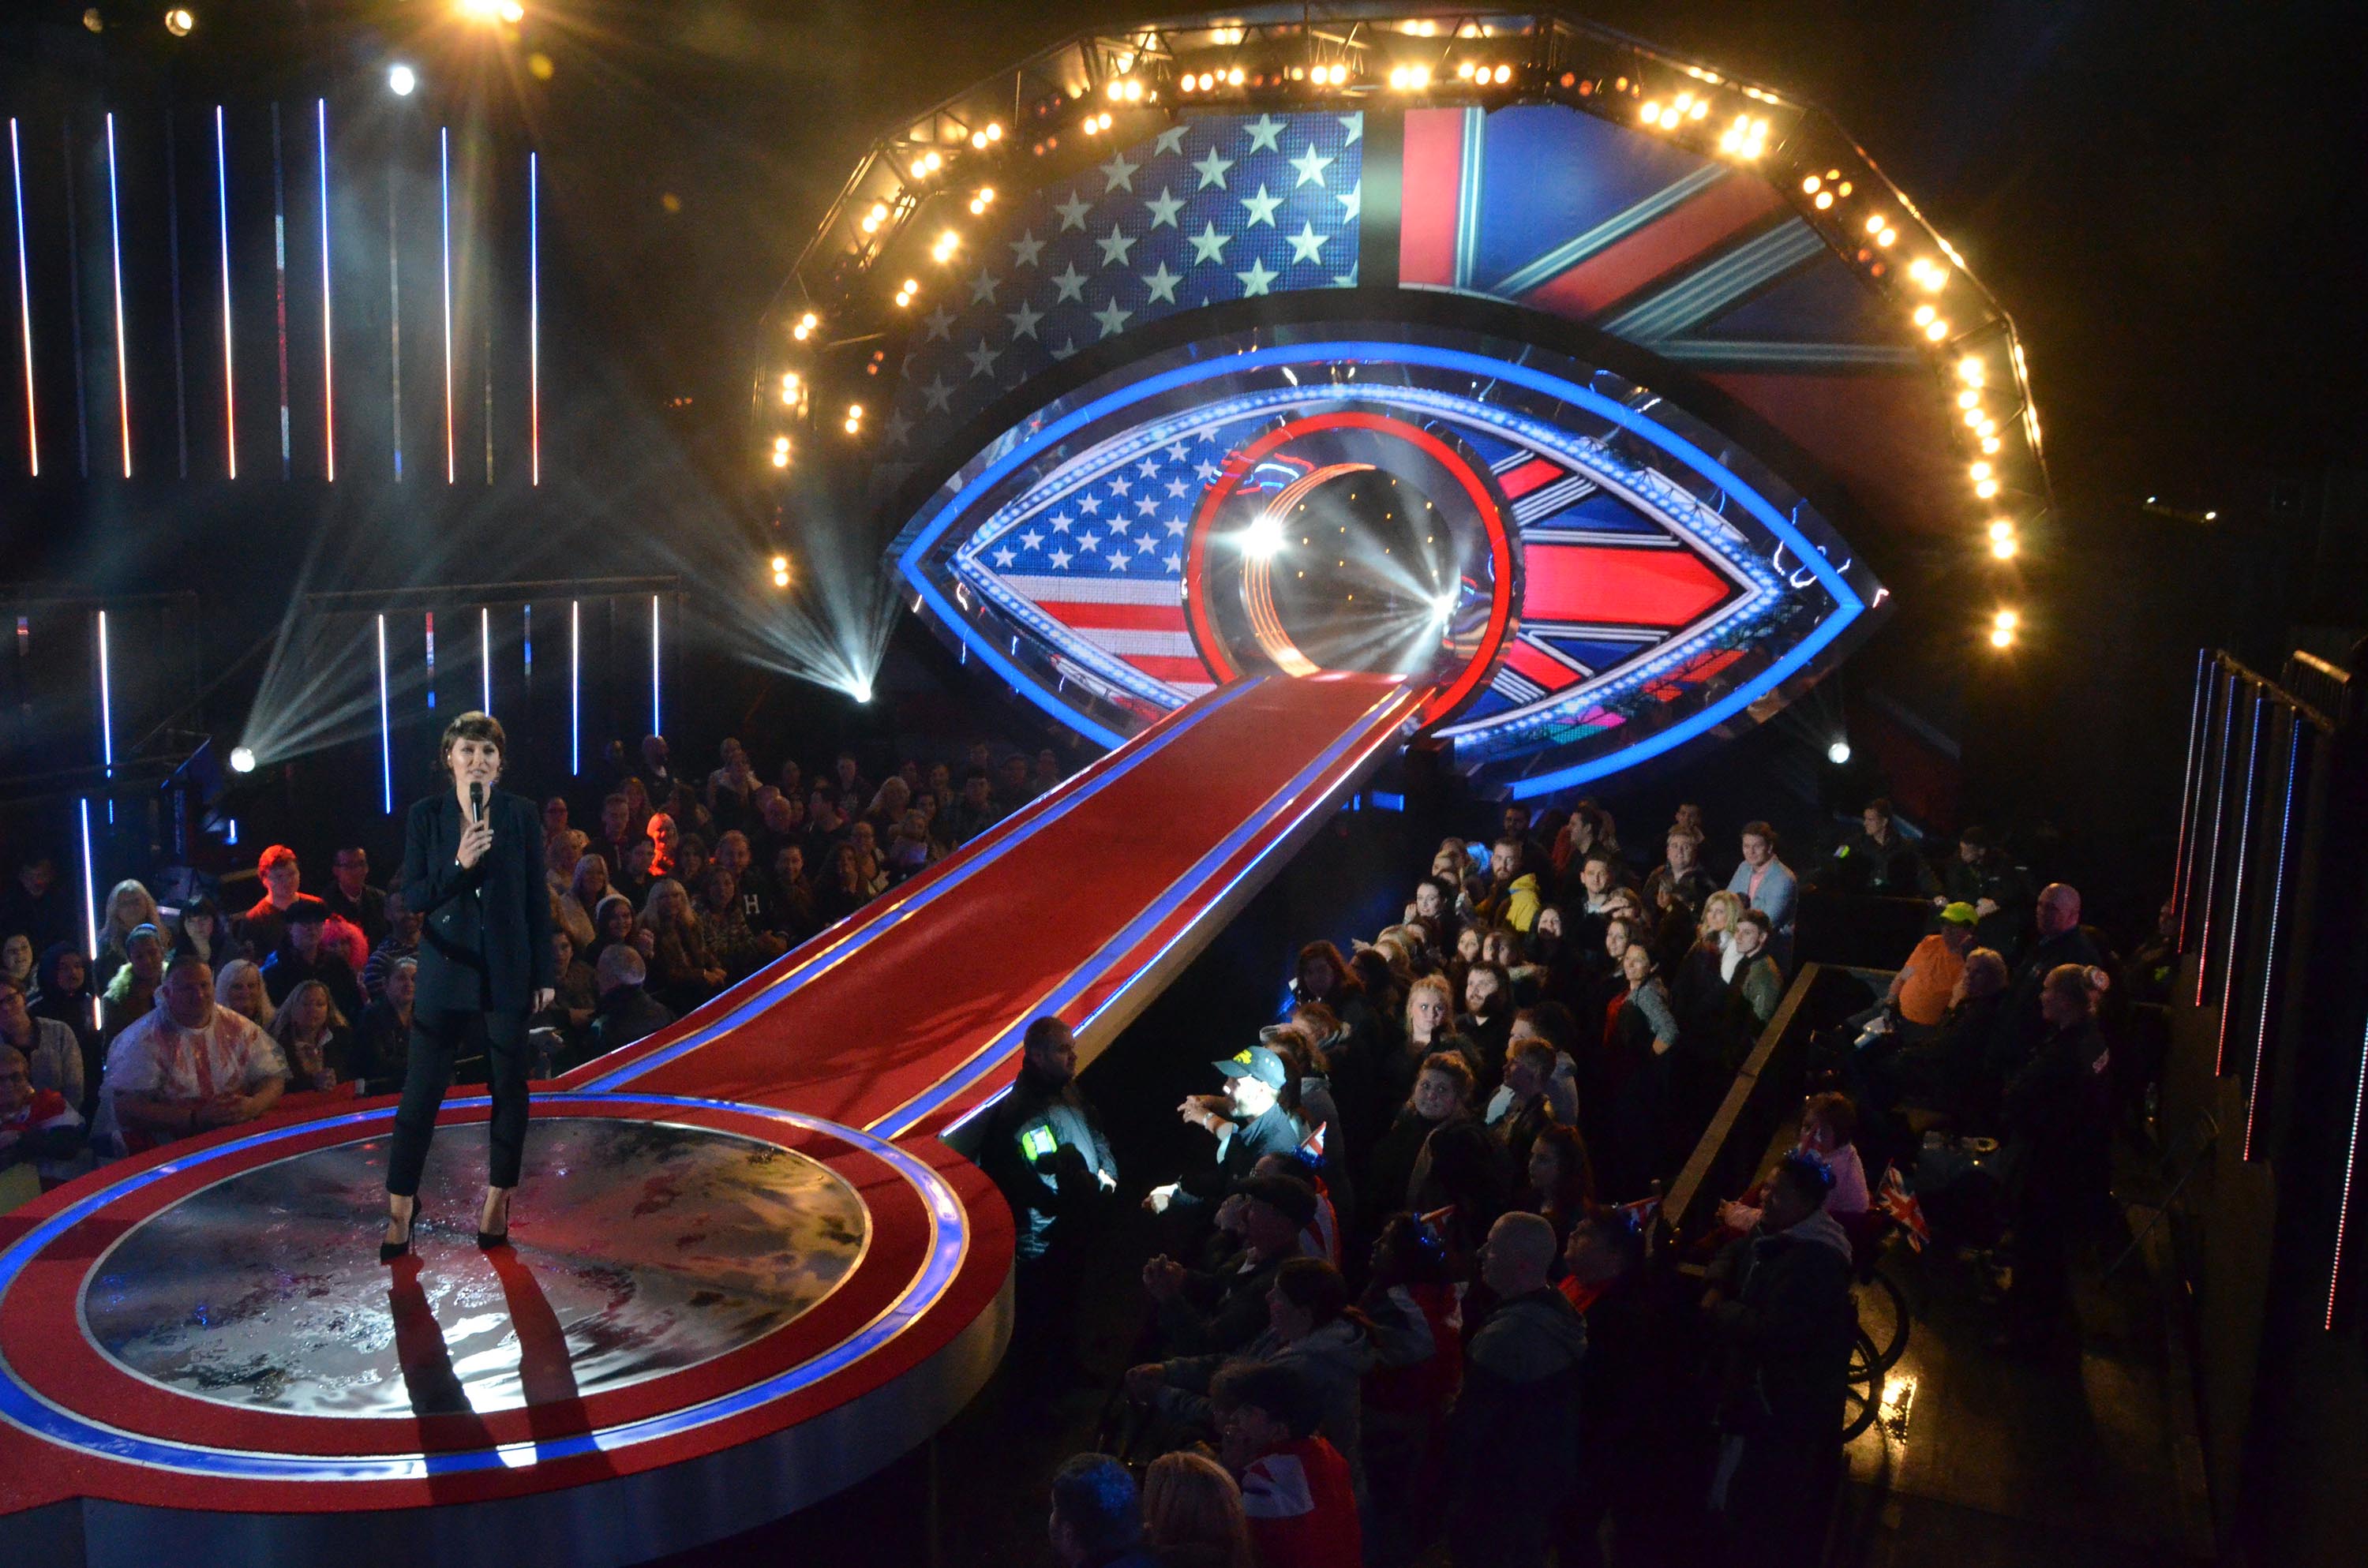 Pre-CBB: Celebrity Big Brother to launch on Tuesday 5th January